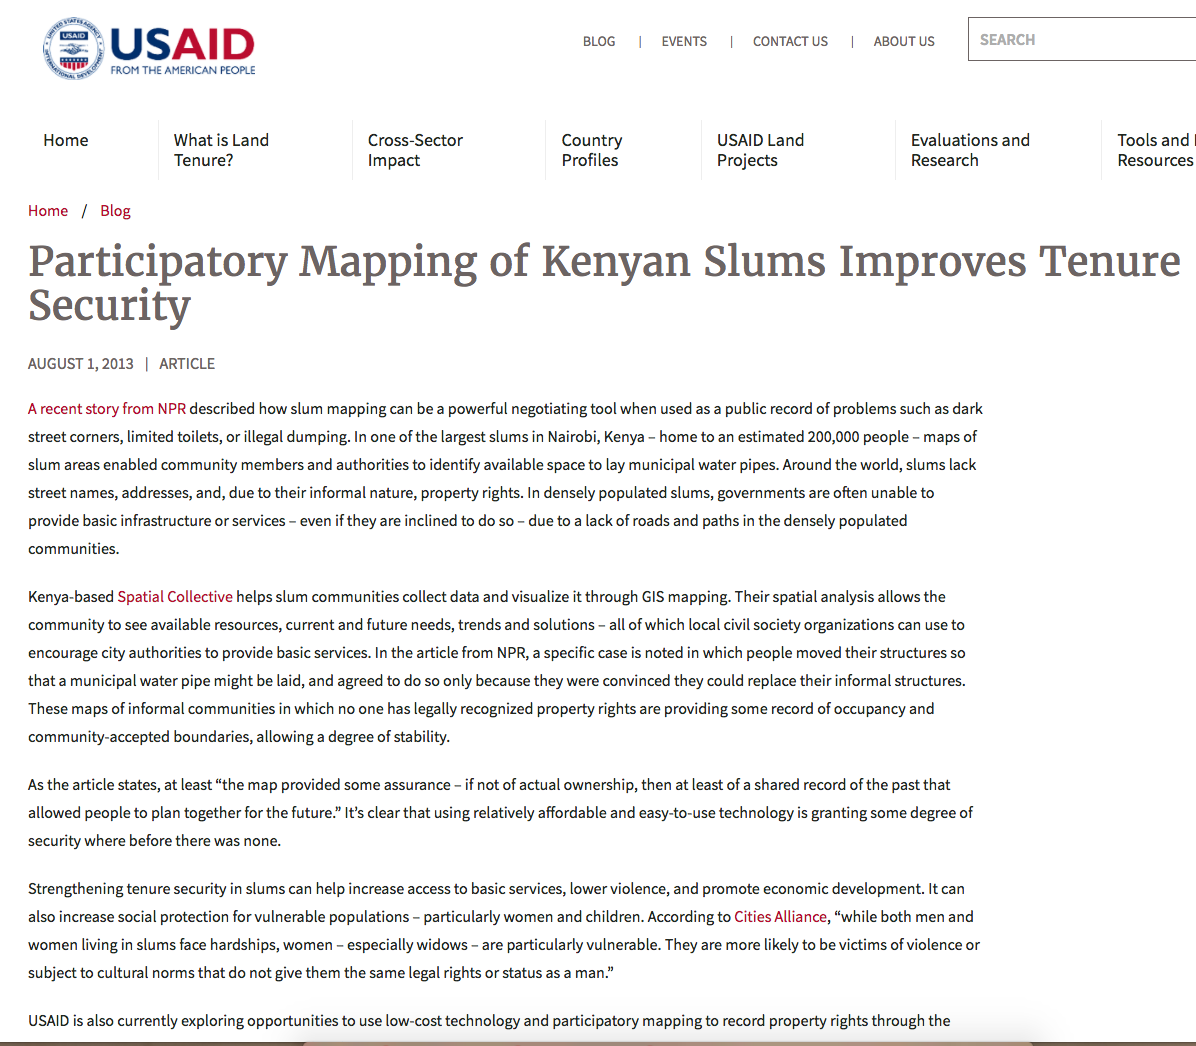 Participatory Mapping of Kenyan Slums Improves Tenure Security cover image